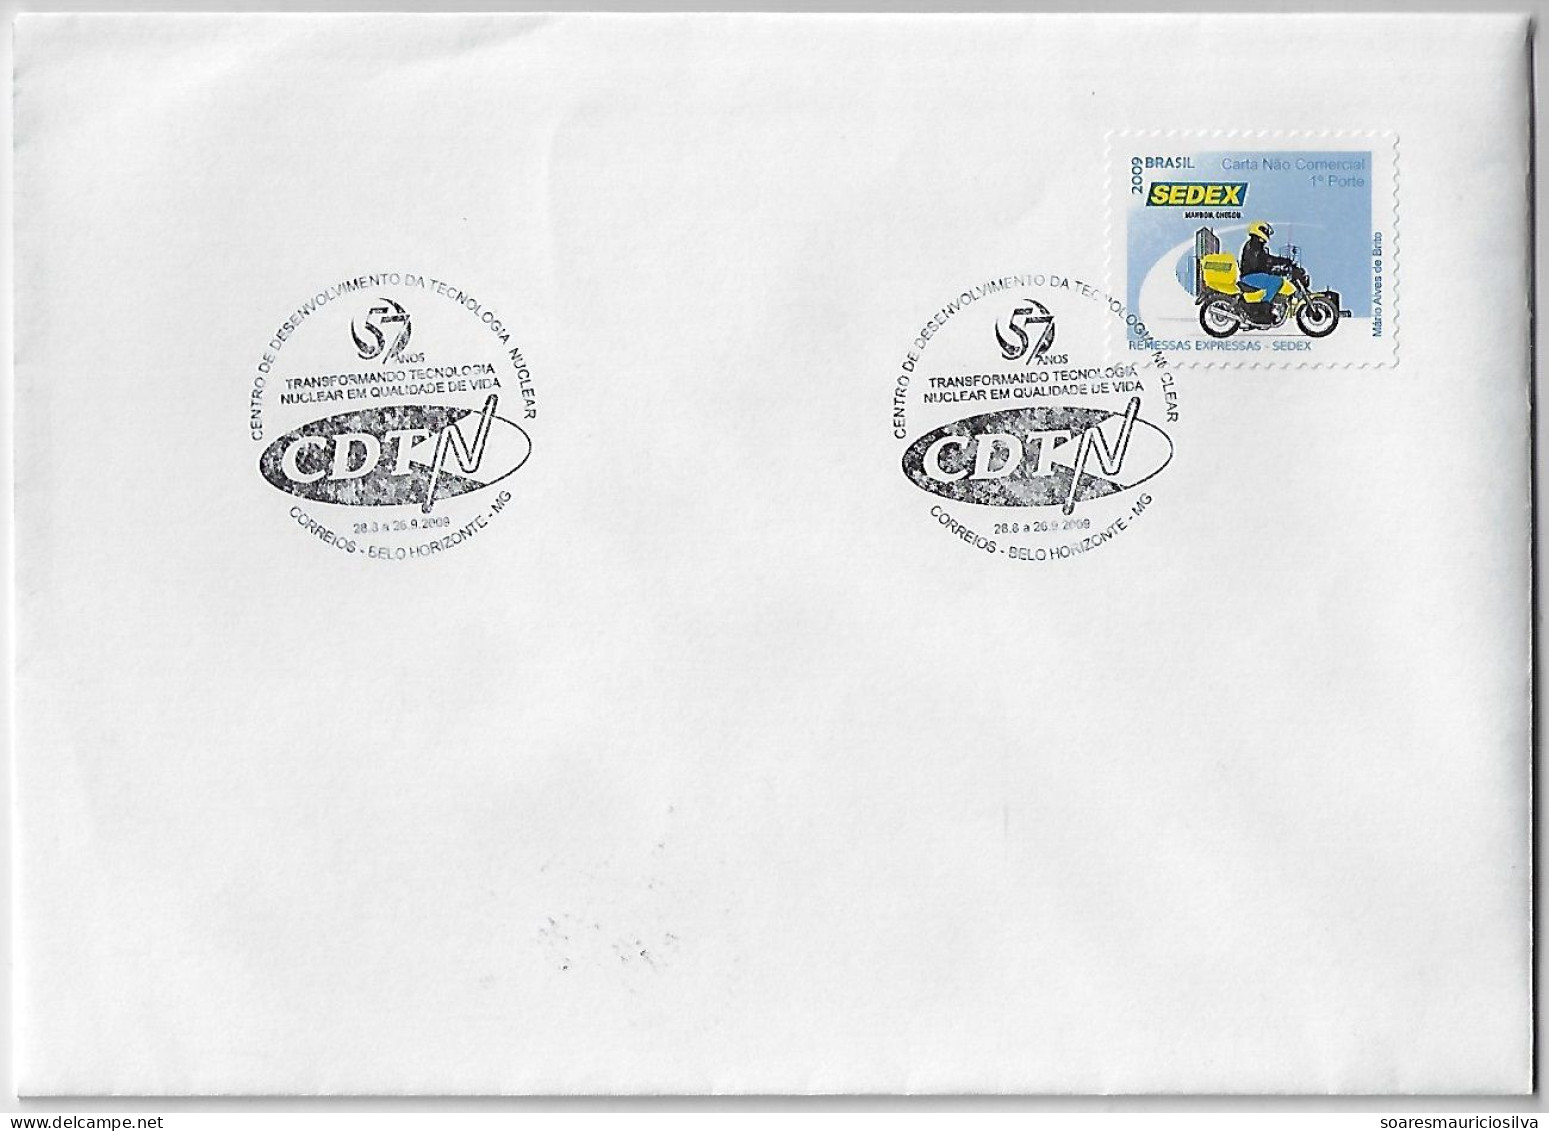 Brazil 2009 Cover Commemorative Cancel 57 Years Center For The Development Of Nuclear Technology CDTN Belo Horizonte - Atomo